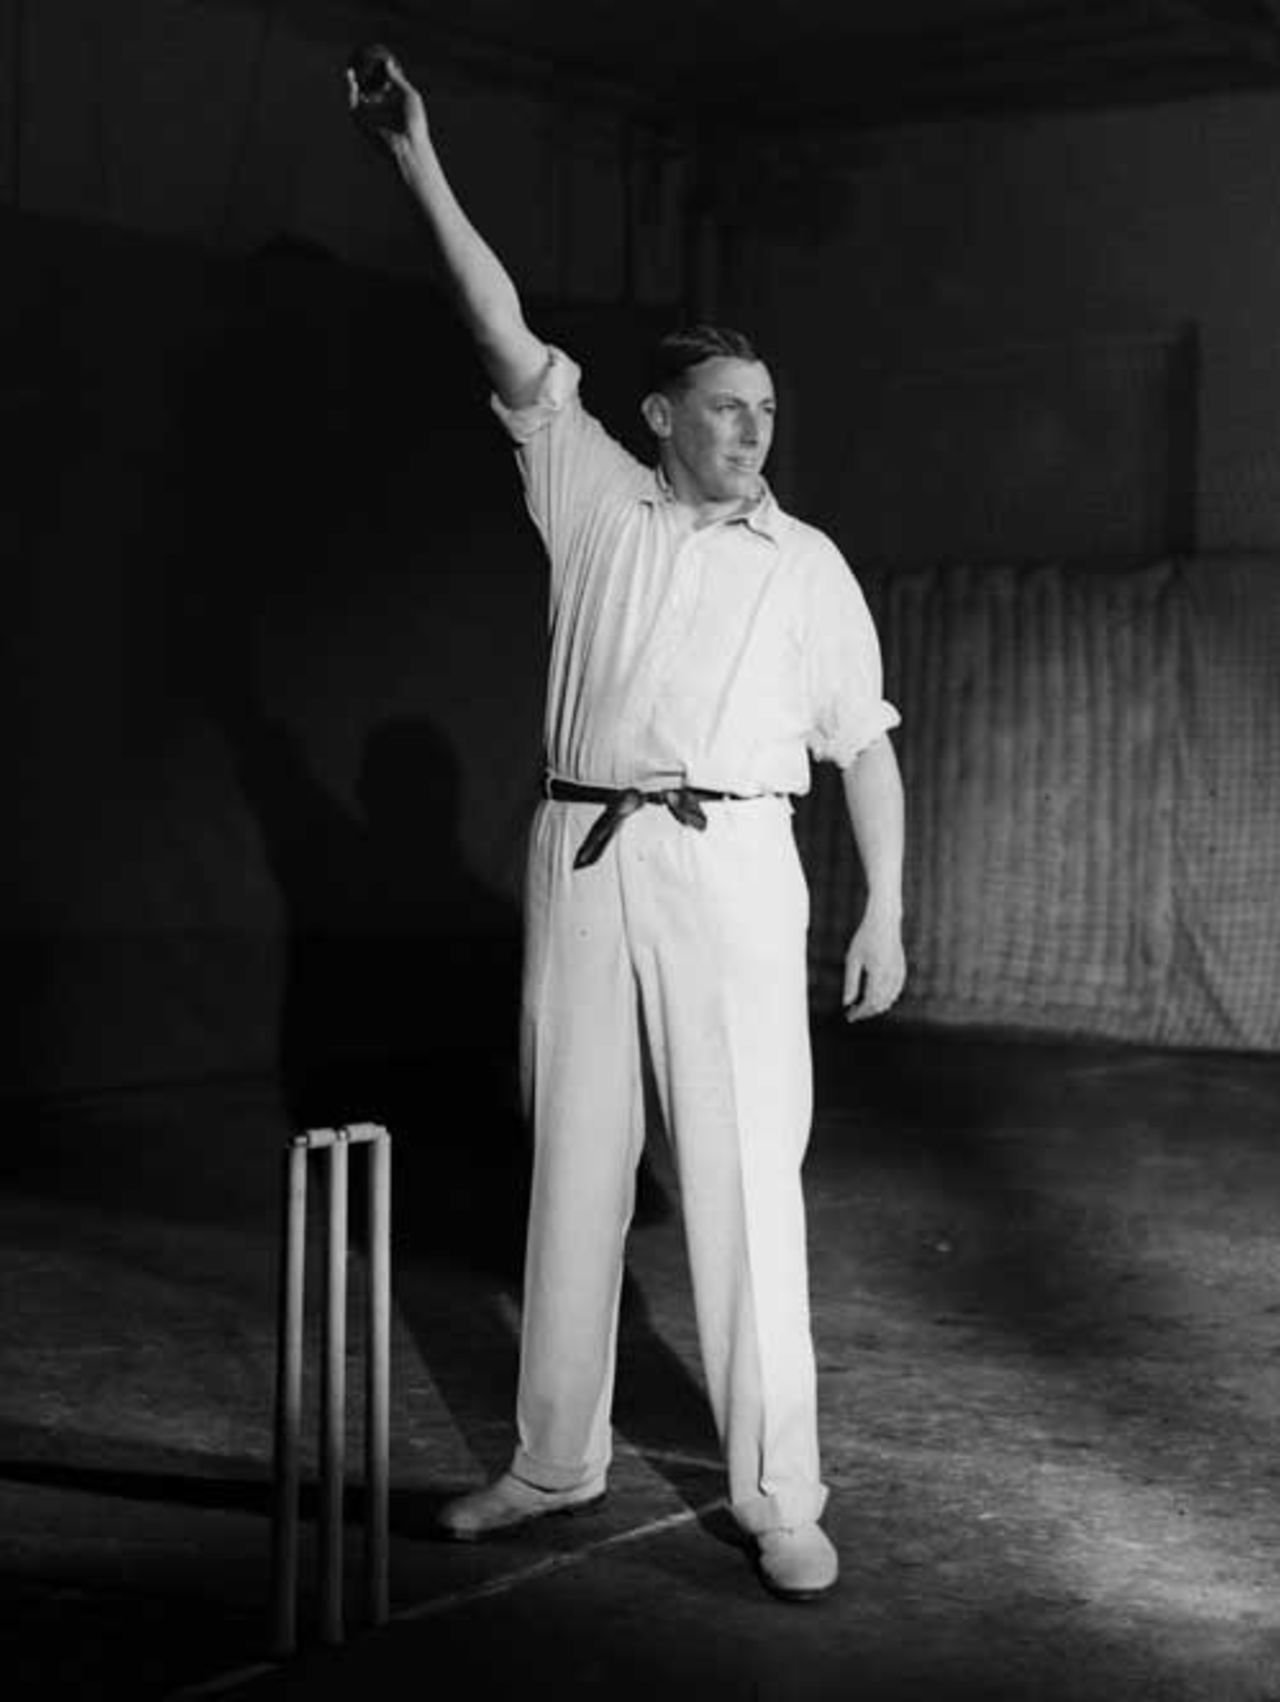 Maurice Tate gives a demonstration of bowling technique, 18 February, 1930